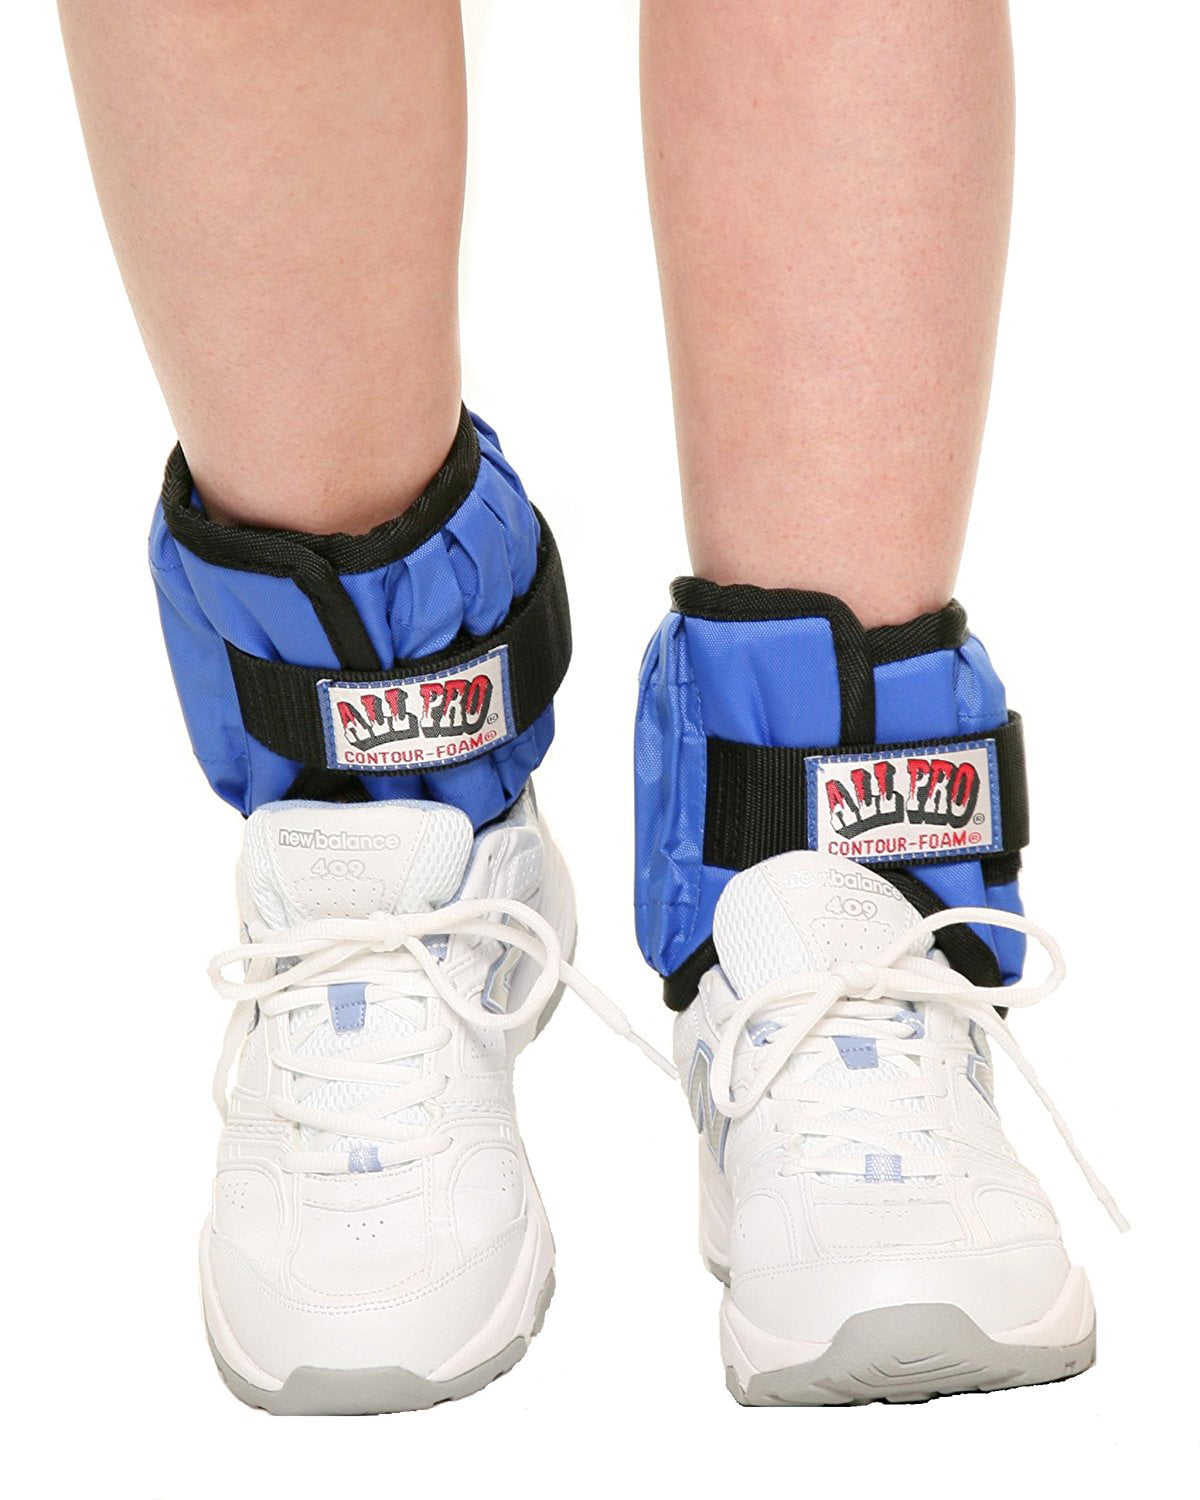 All Pro 10 lb Adjustable Ankle Weights pair 